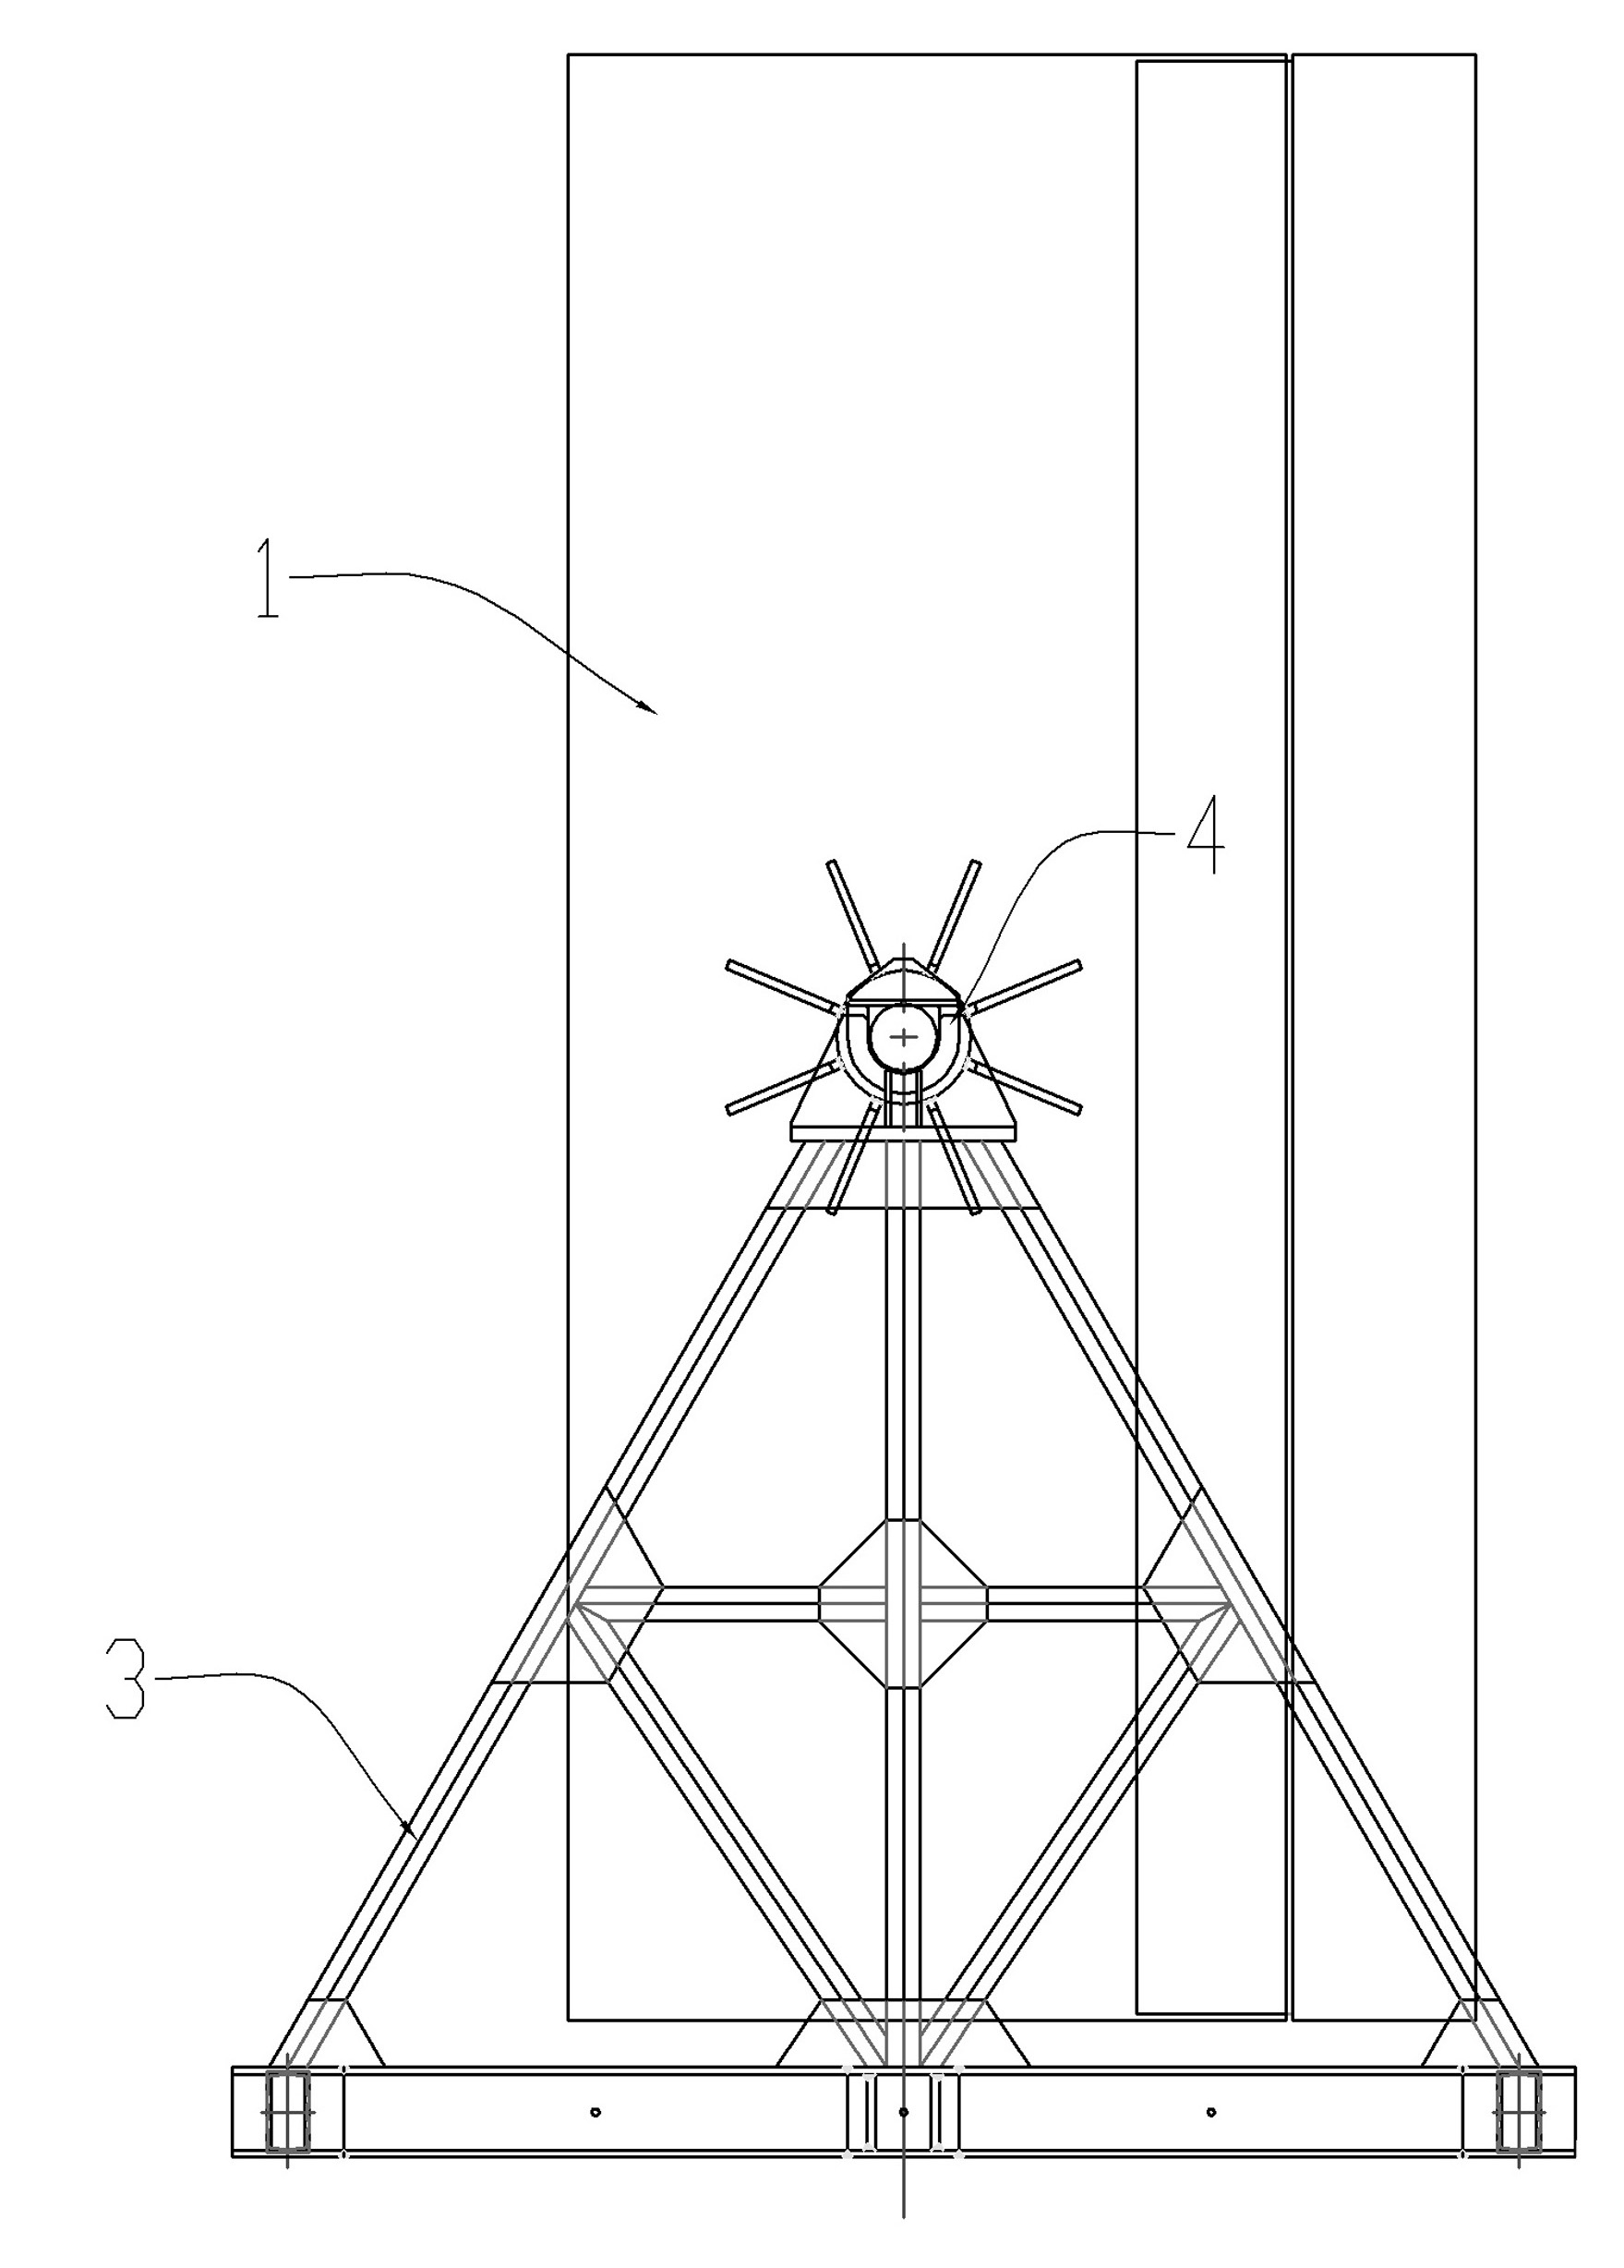 Turning-over method, structure and device for large-scale equipment